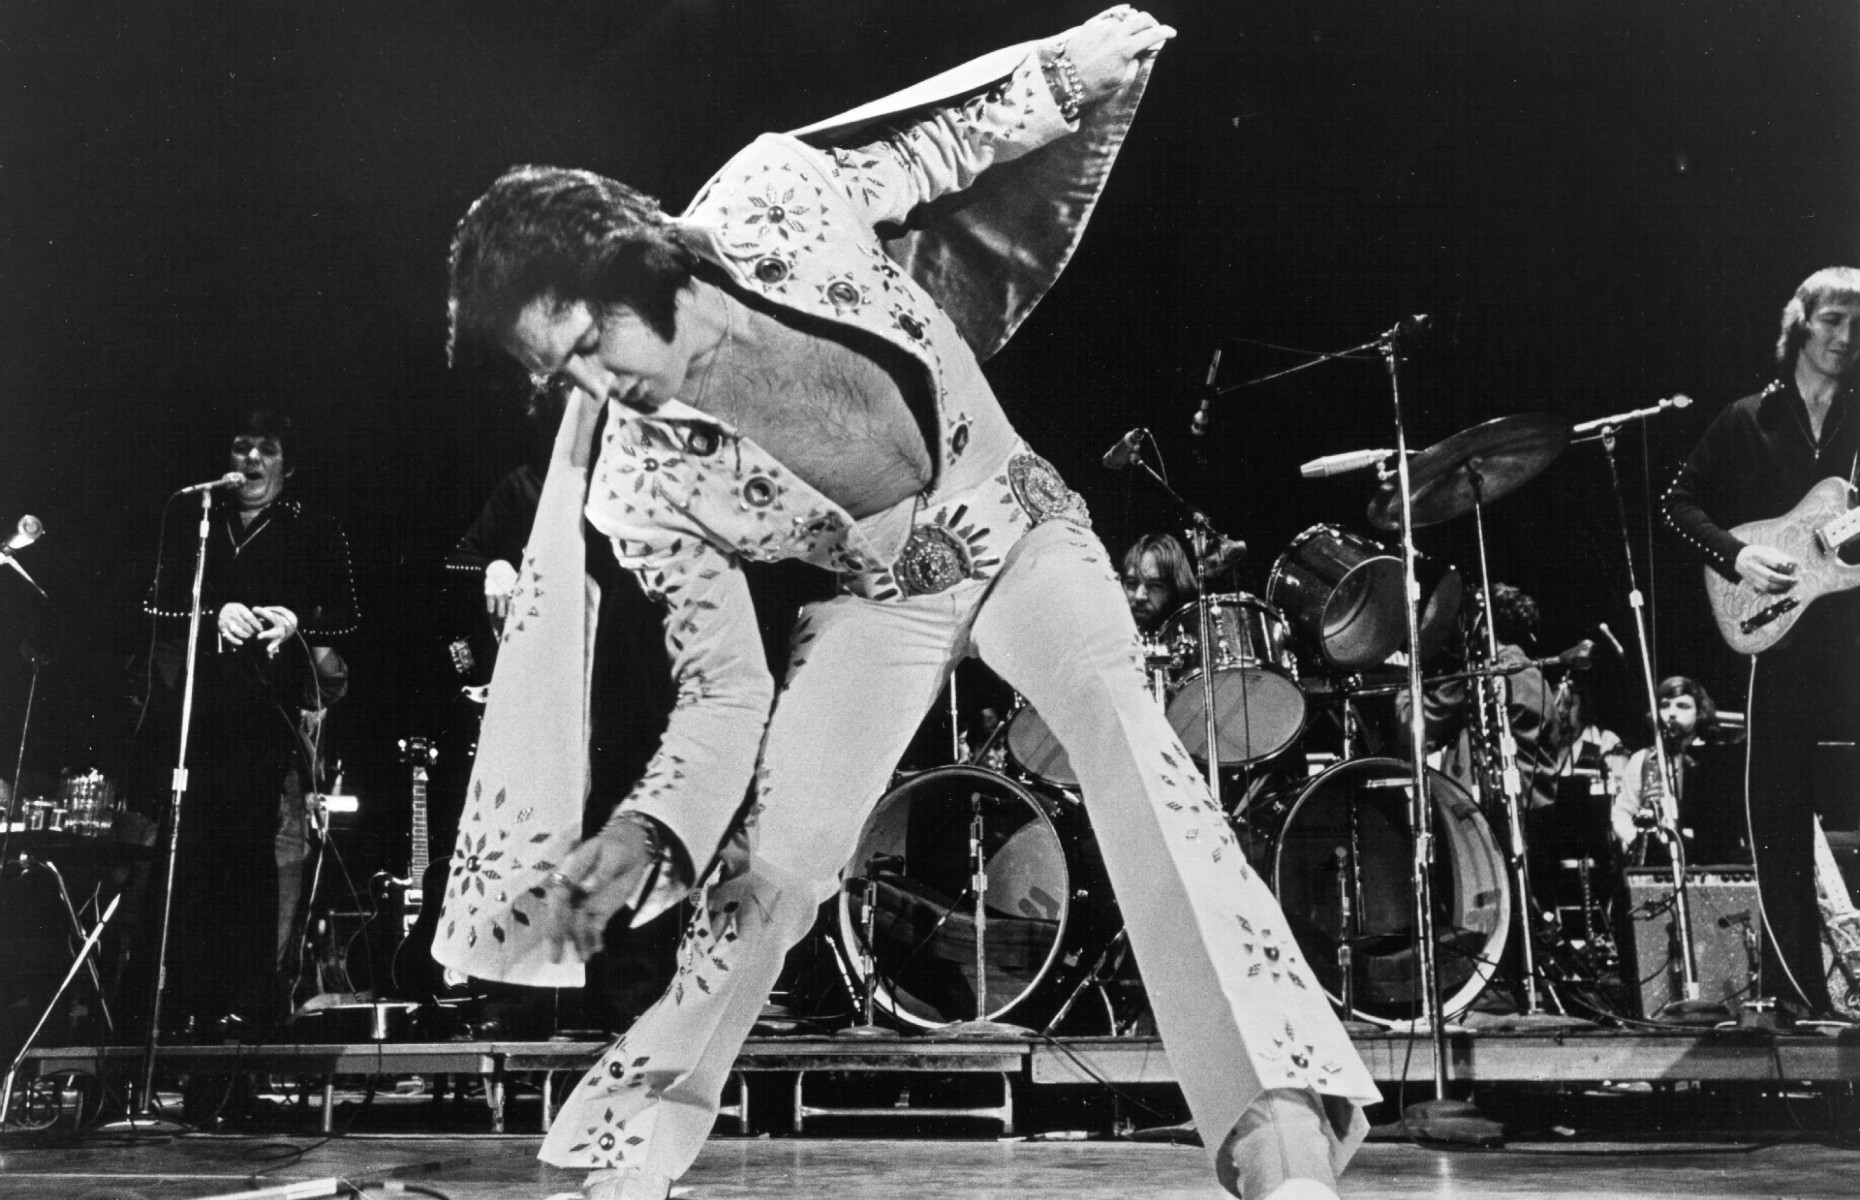 Elvis on Stage (Image: Michael Ochs Archives/Getty Images)